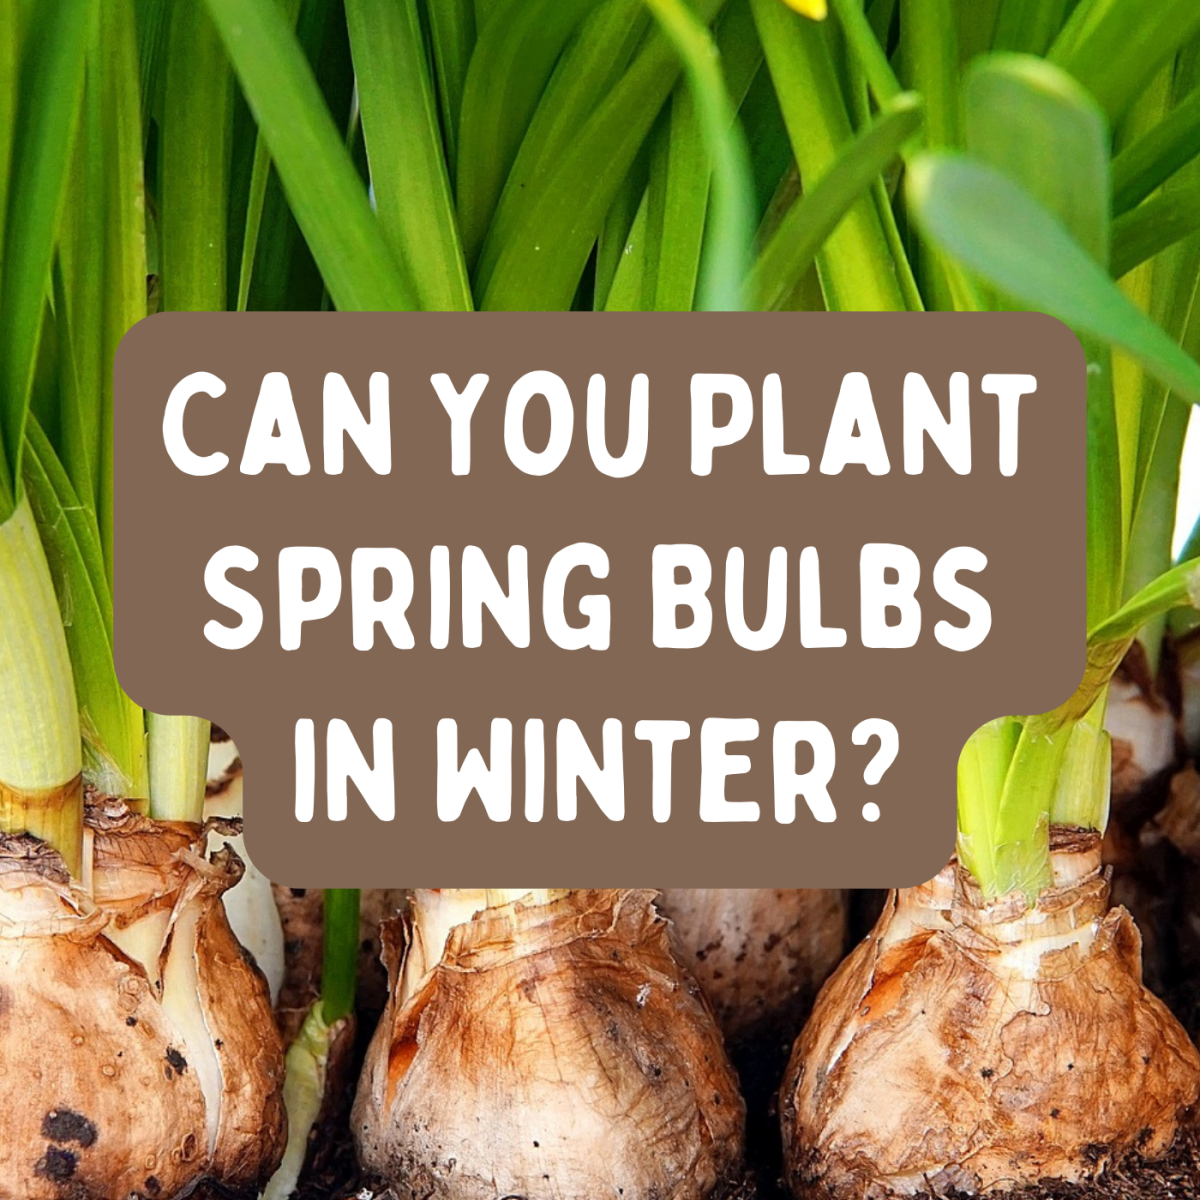 Spring bulbs are usually planted in fall, but it's not too late to plant them in winter!